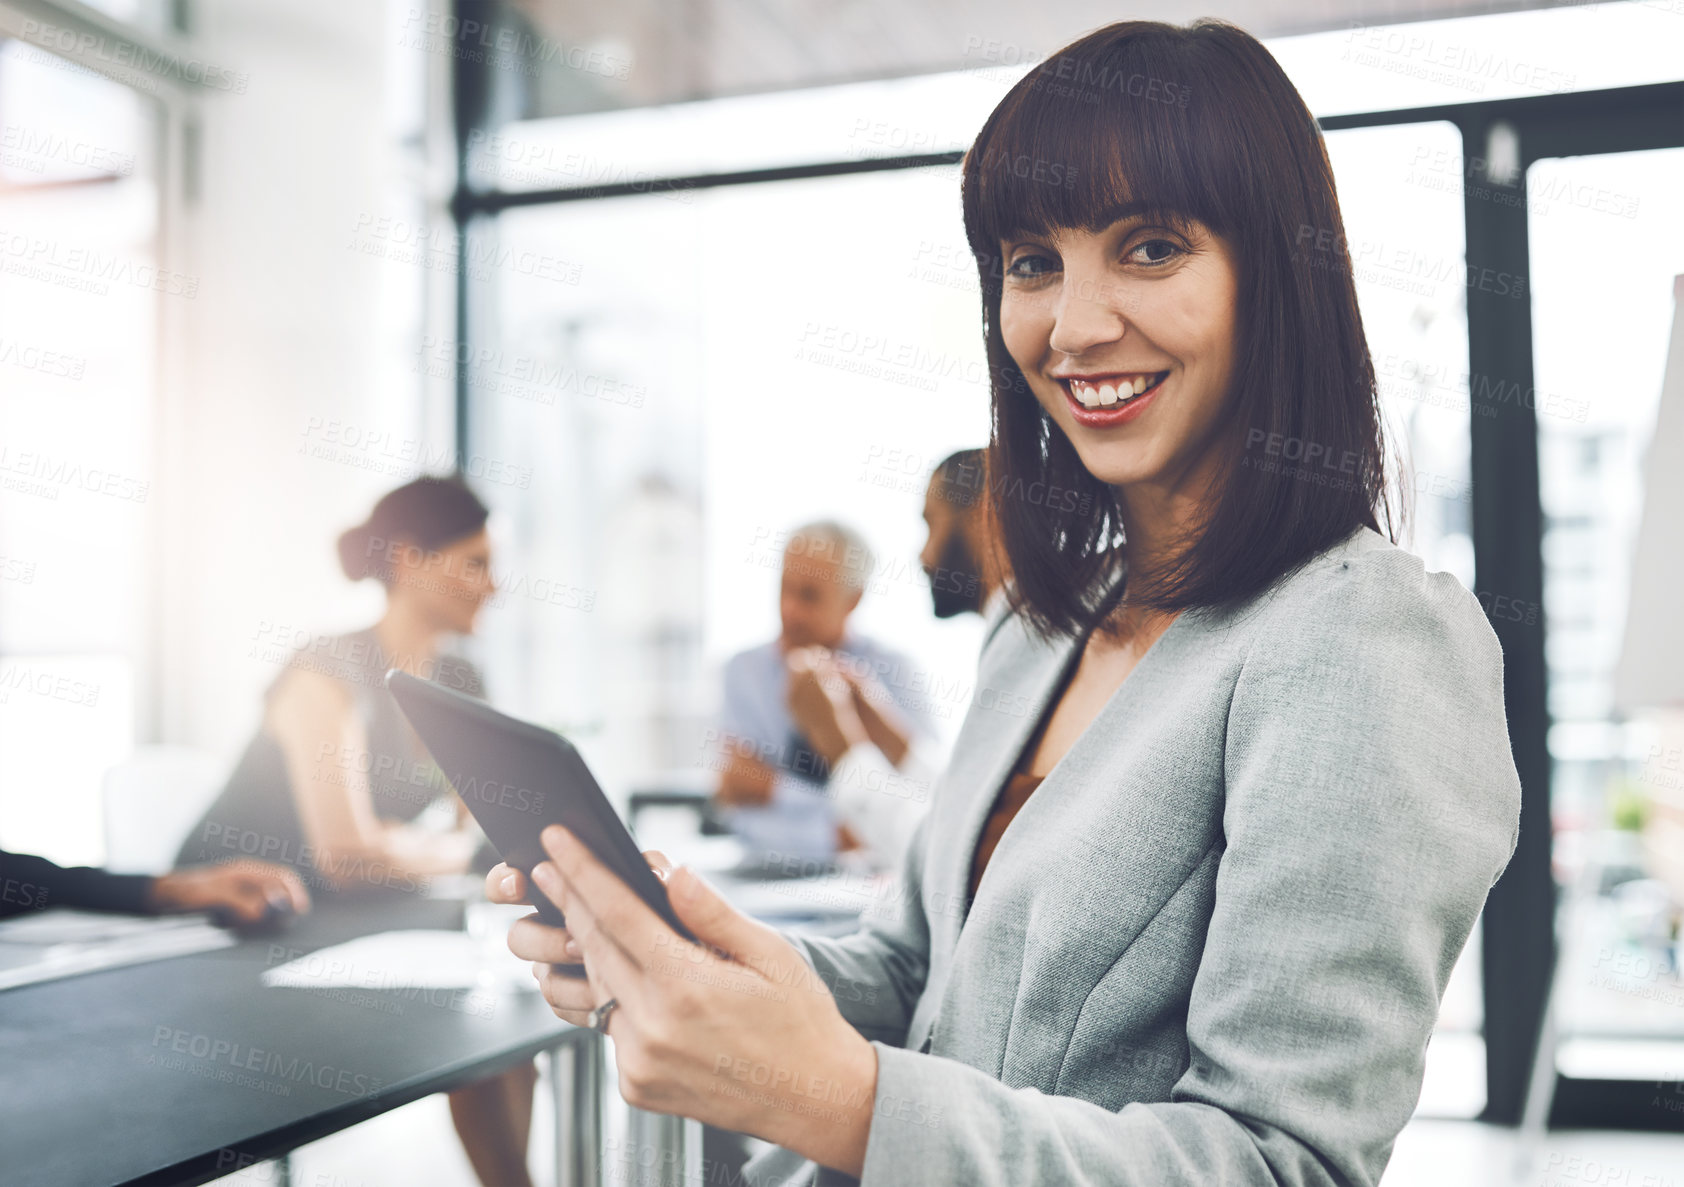 Buy stock photo Cropped portrait of an attractive young businesswoman using her tablet during a meeting in the boardroom